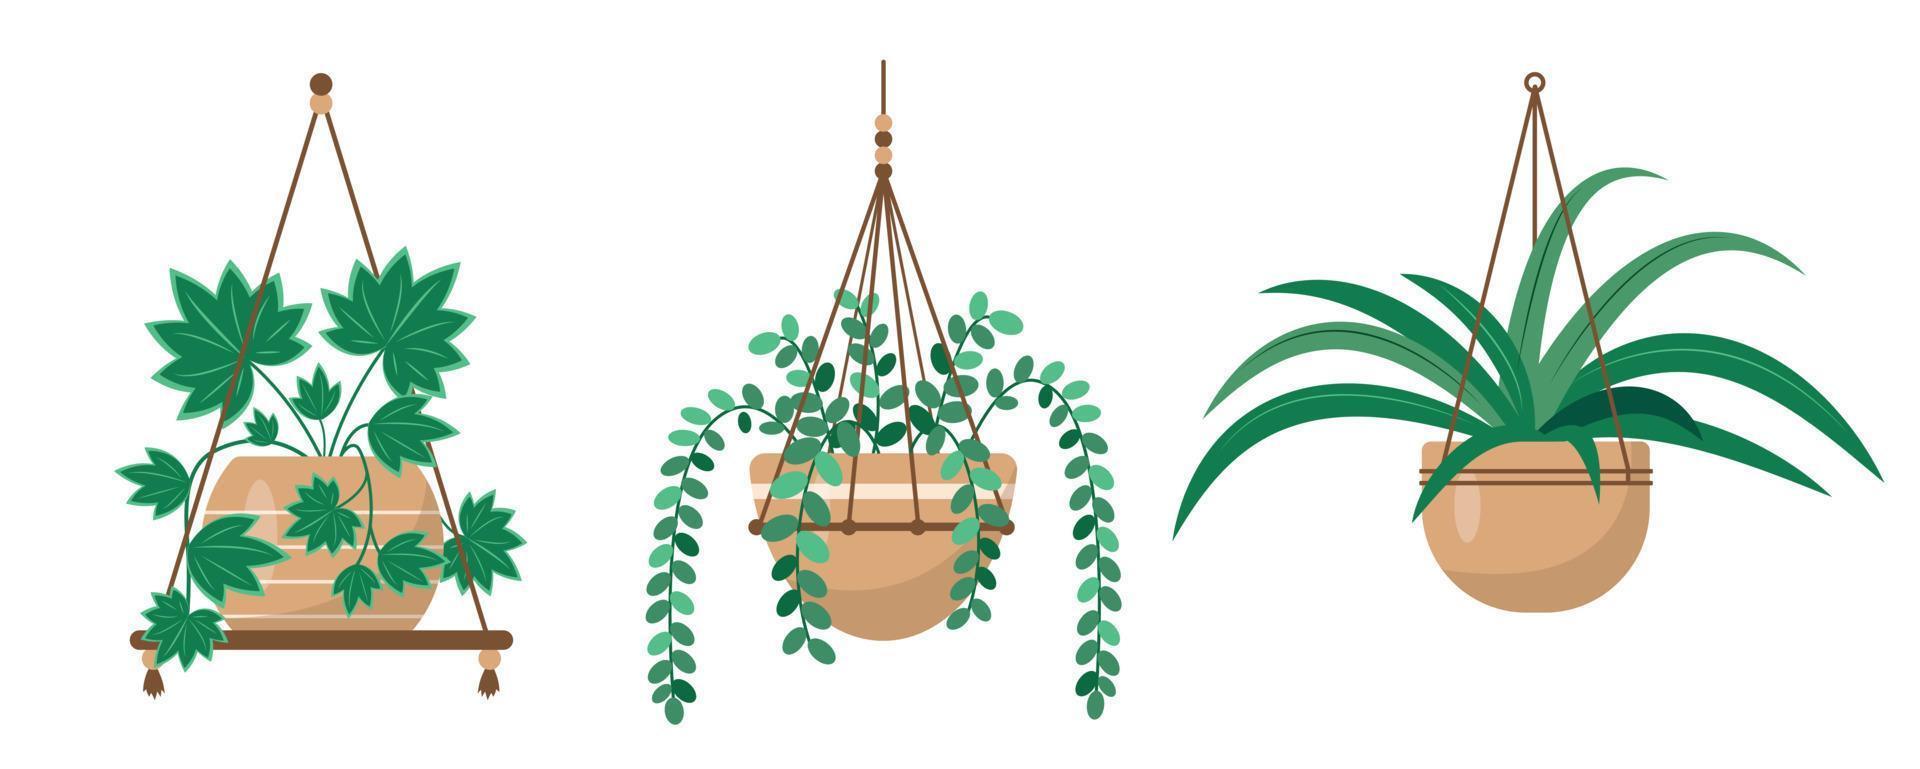 Hangers for decorative house plants or flowers in pots. Hanging macrame pots for indoor Home or office garden. Flat or cartoon icons vector illustration for interior decor and botanical design.